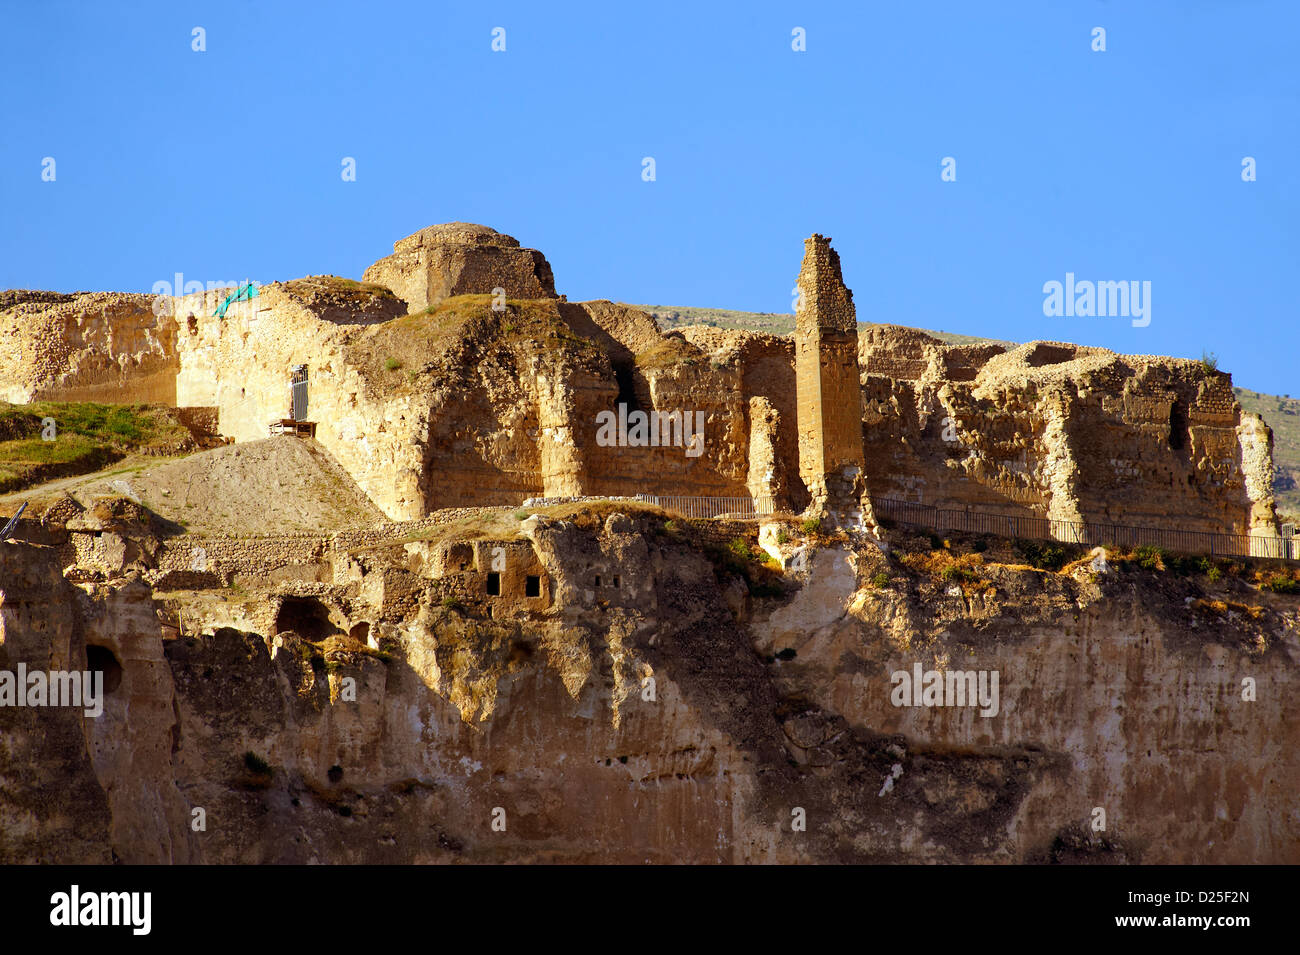 Remains of the  ancient citadel of Hasankeyf on the cliffs above the Tigris, Turkey Stock Photo